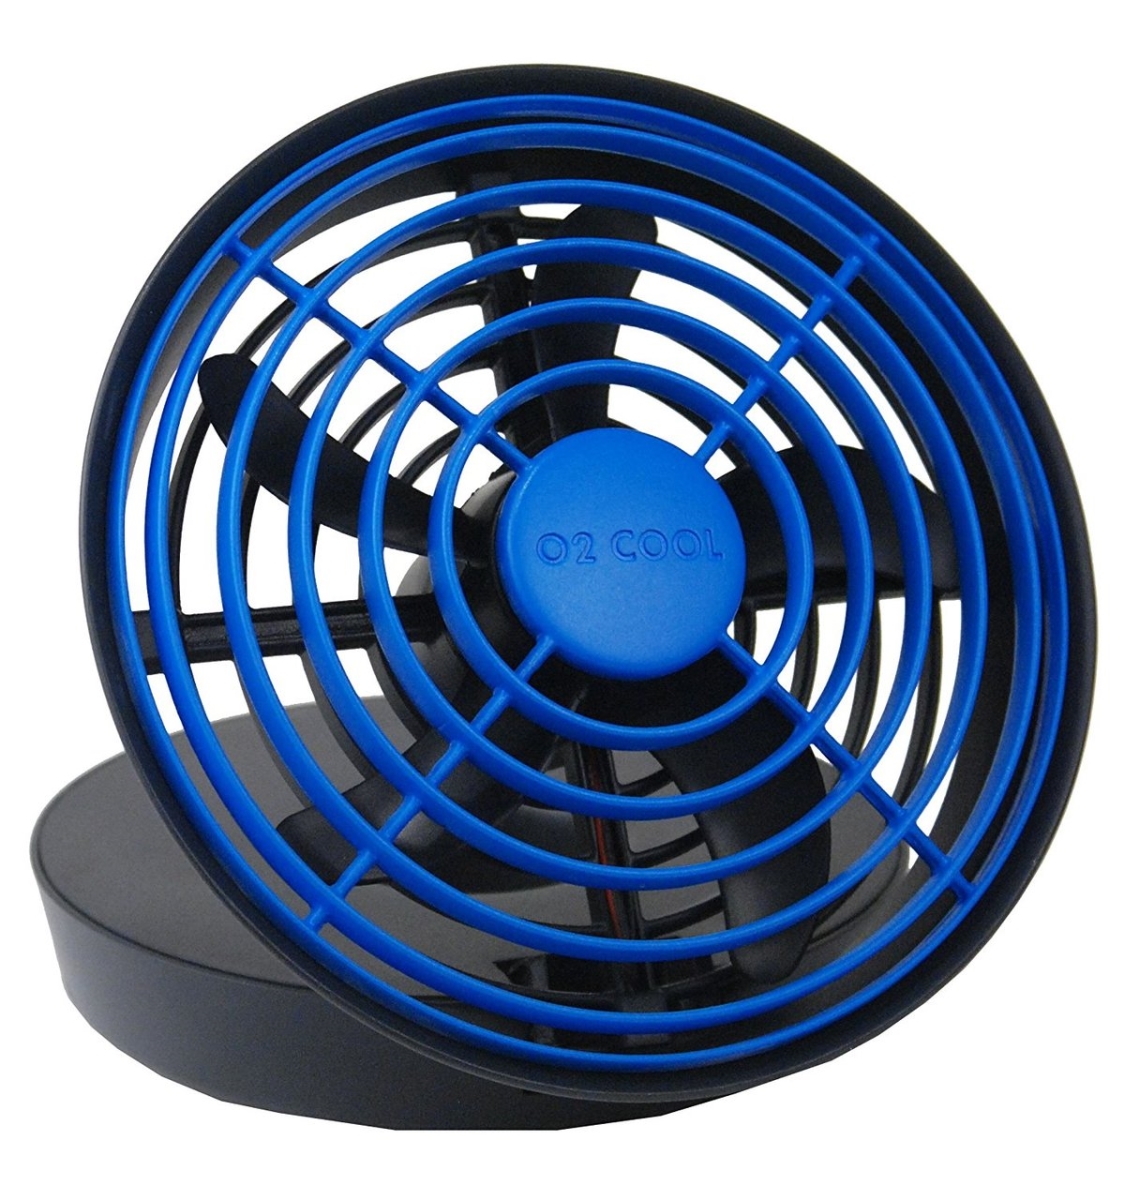 Picture of O2cool 239226 5 in. Battery & USB Portable Fan